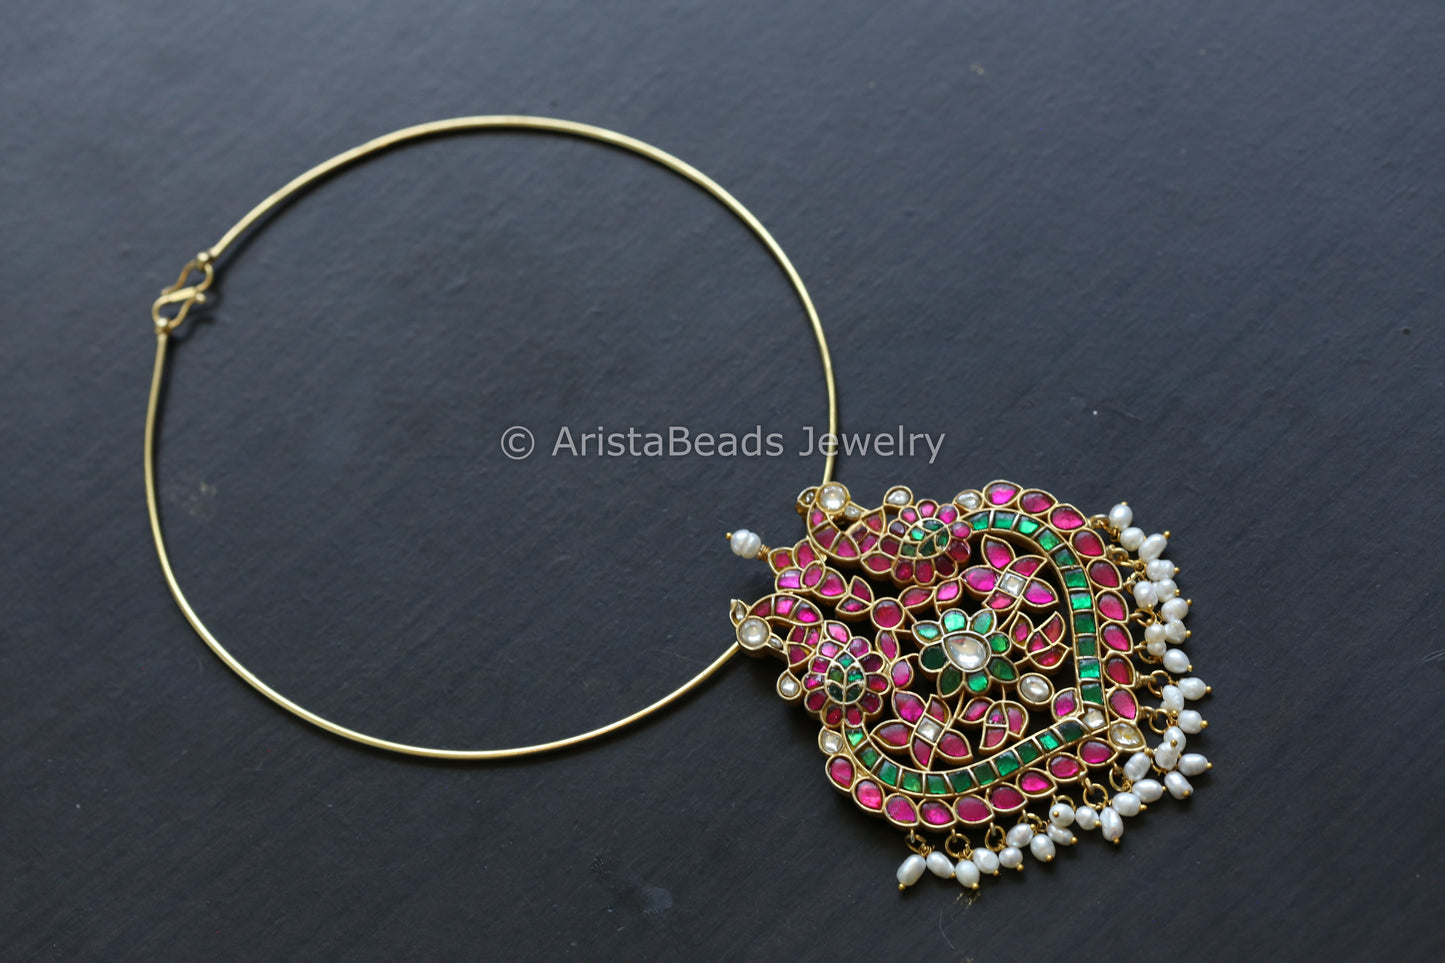 Real Jadau Hasli Necklace (Removable) - Ruby Green